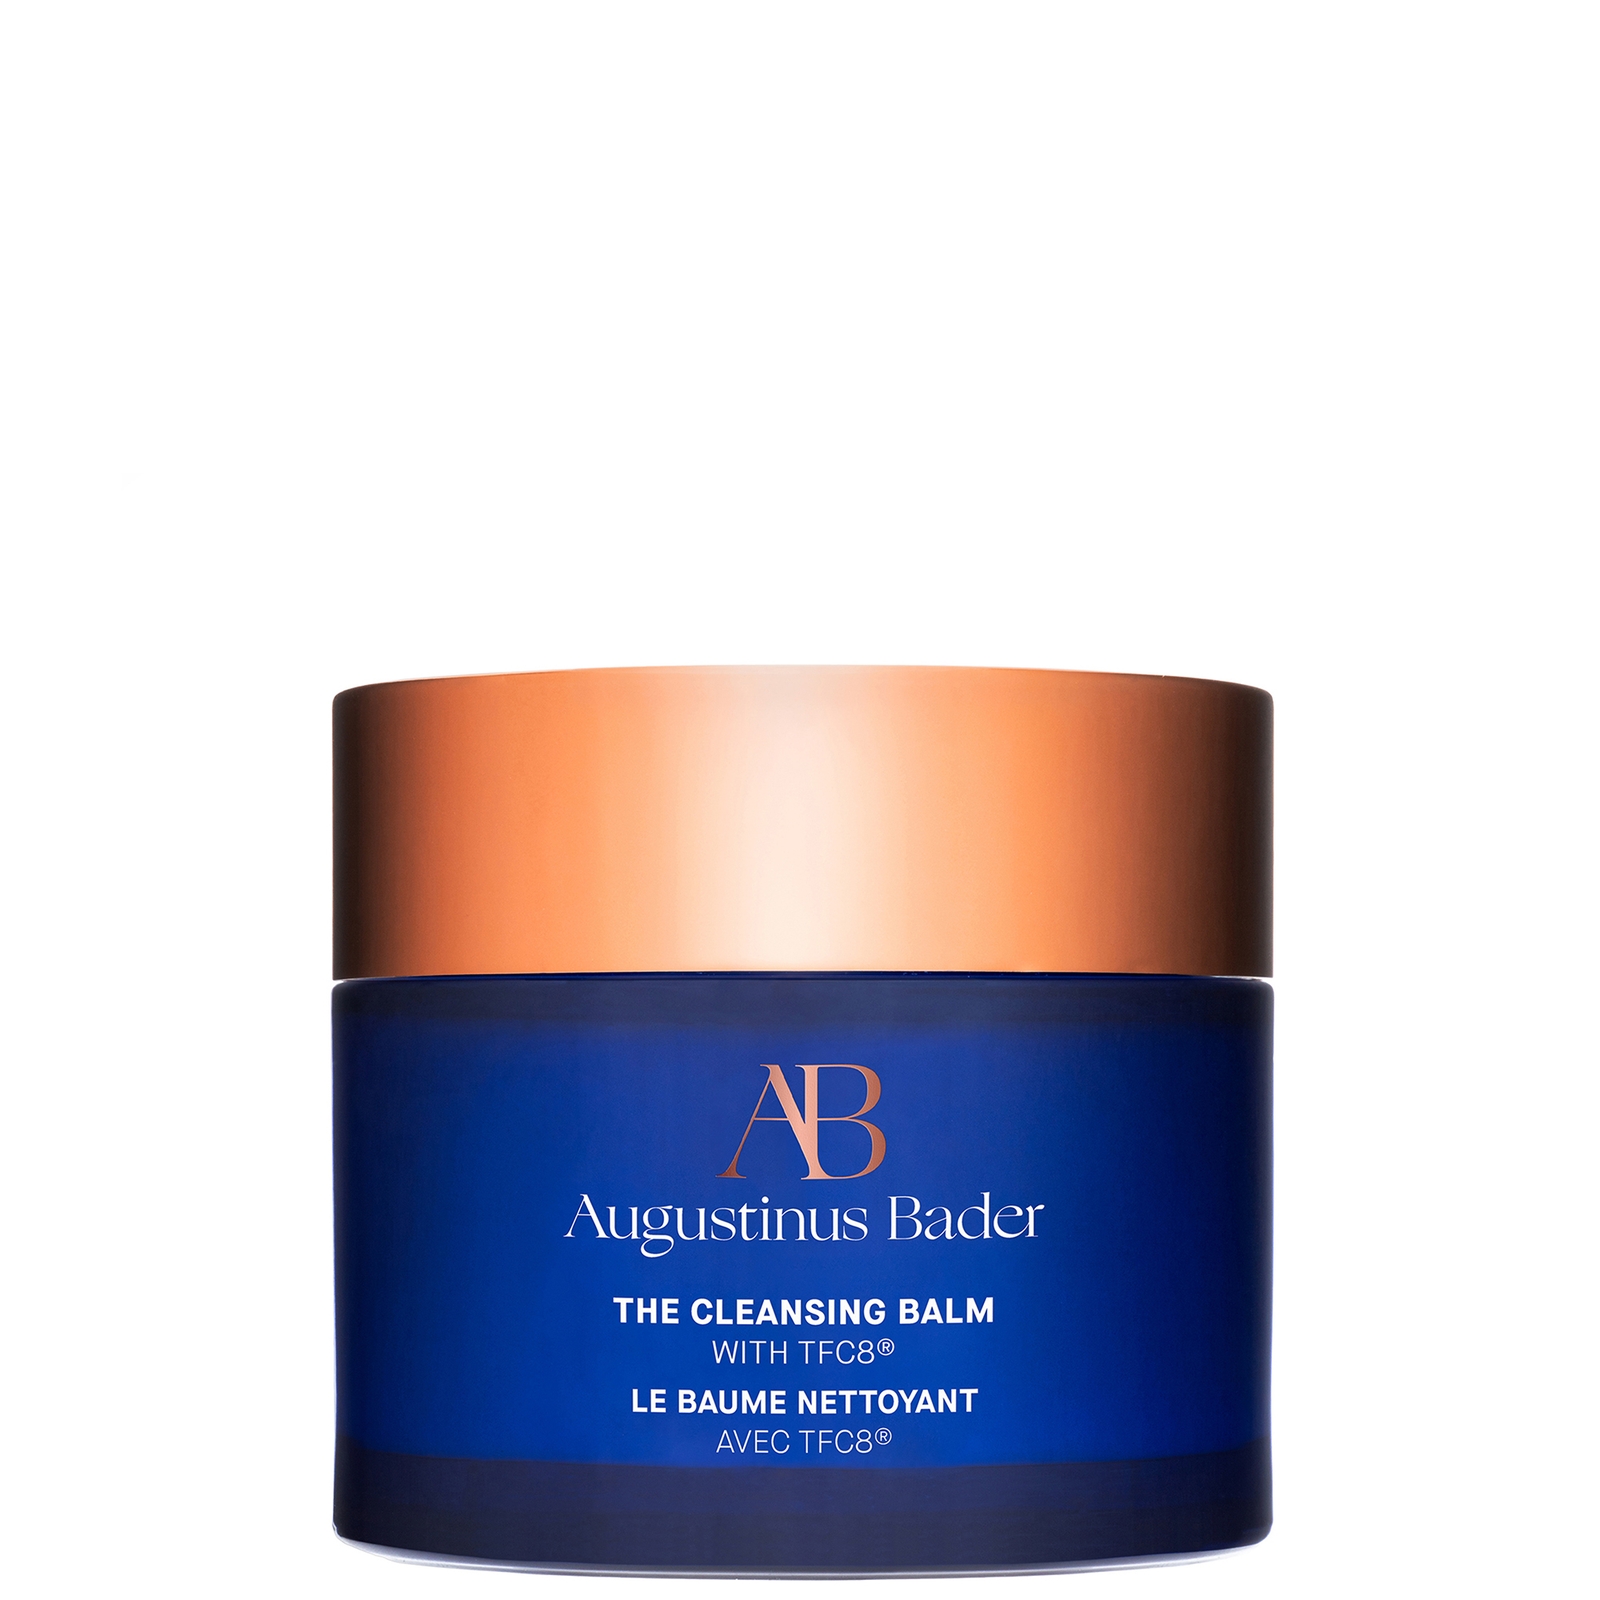 Photos - Facial / Body Cleansing Product Augustinus Bader The Cleansing Balm 